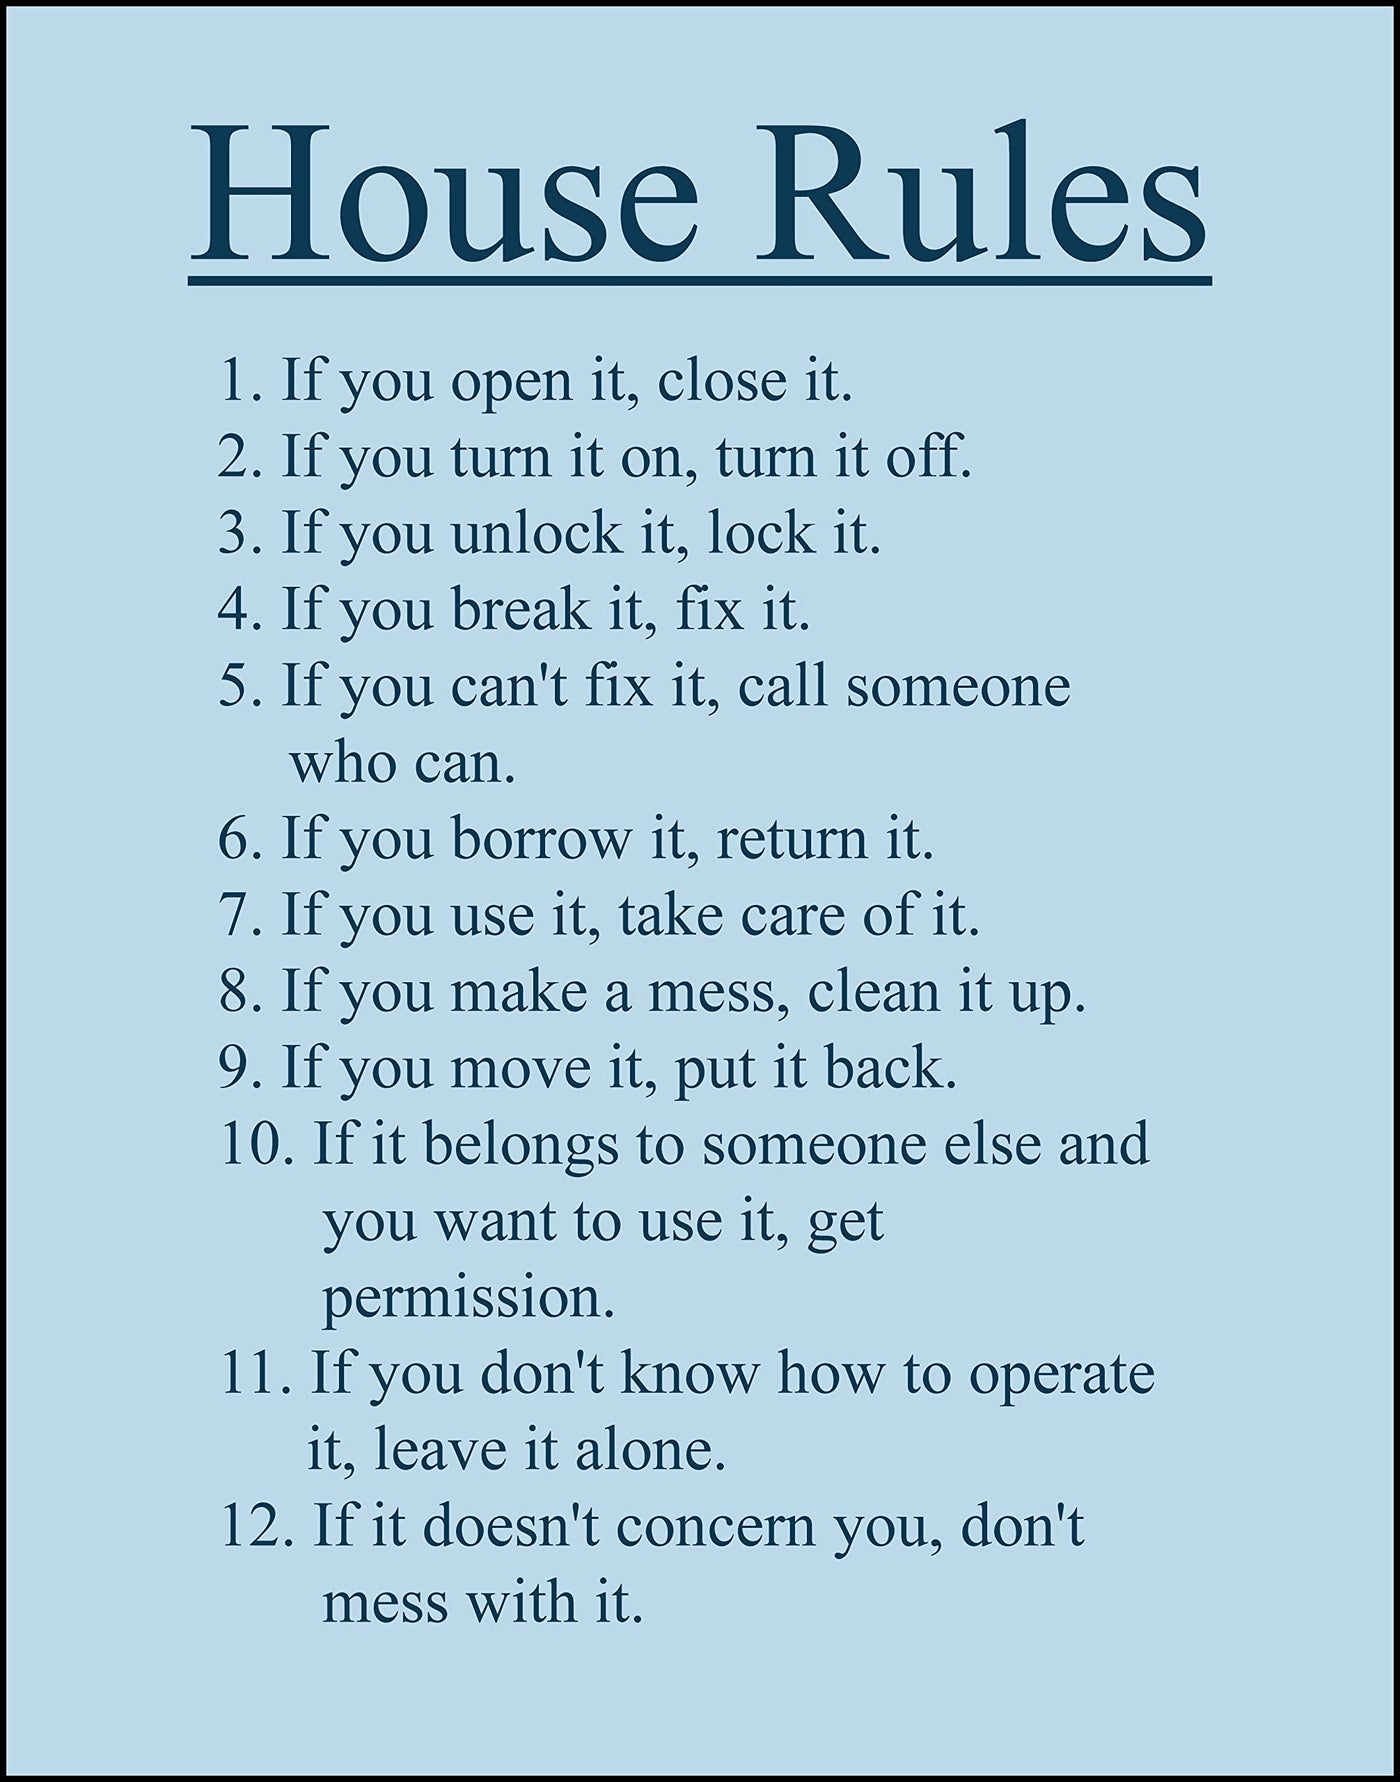 House Rules-Motivational Family Wall Decor -11x14" Inspirational Life Lessons Typography Print -Ready to Frame. Home-Office-Living Room Decor. Encouraging Funny Gift for Kids, Teens & Graduates!